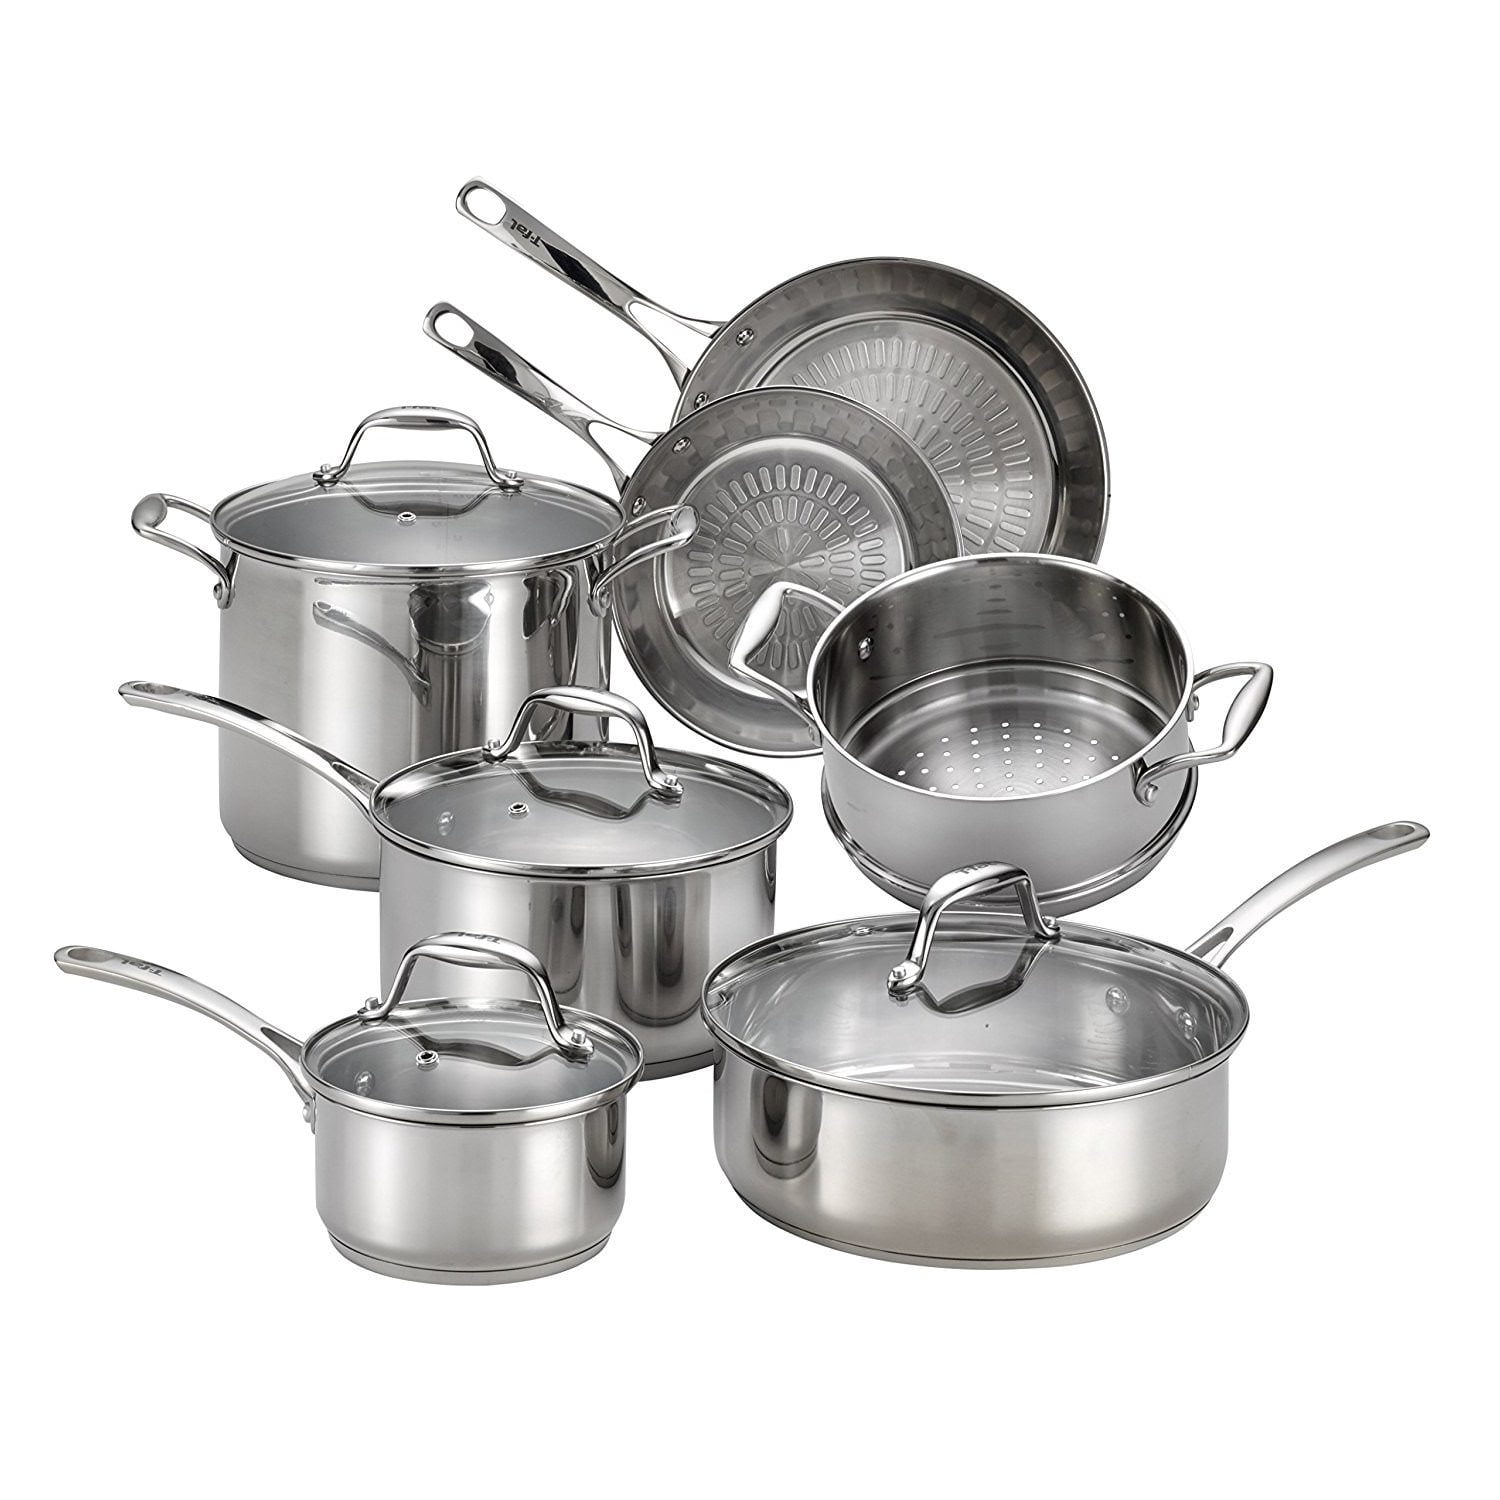 T-fal Stainless Steel Cookware Set 11 Piece Induction, Pots and Pans,  Dishwasher Safe